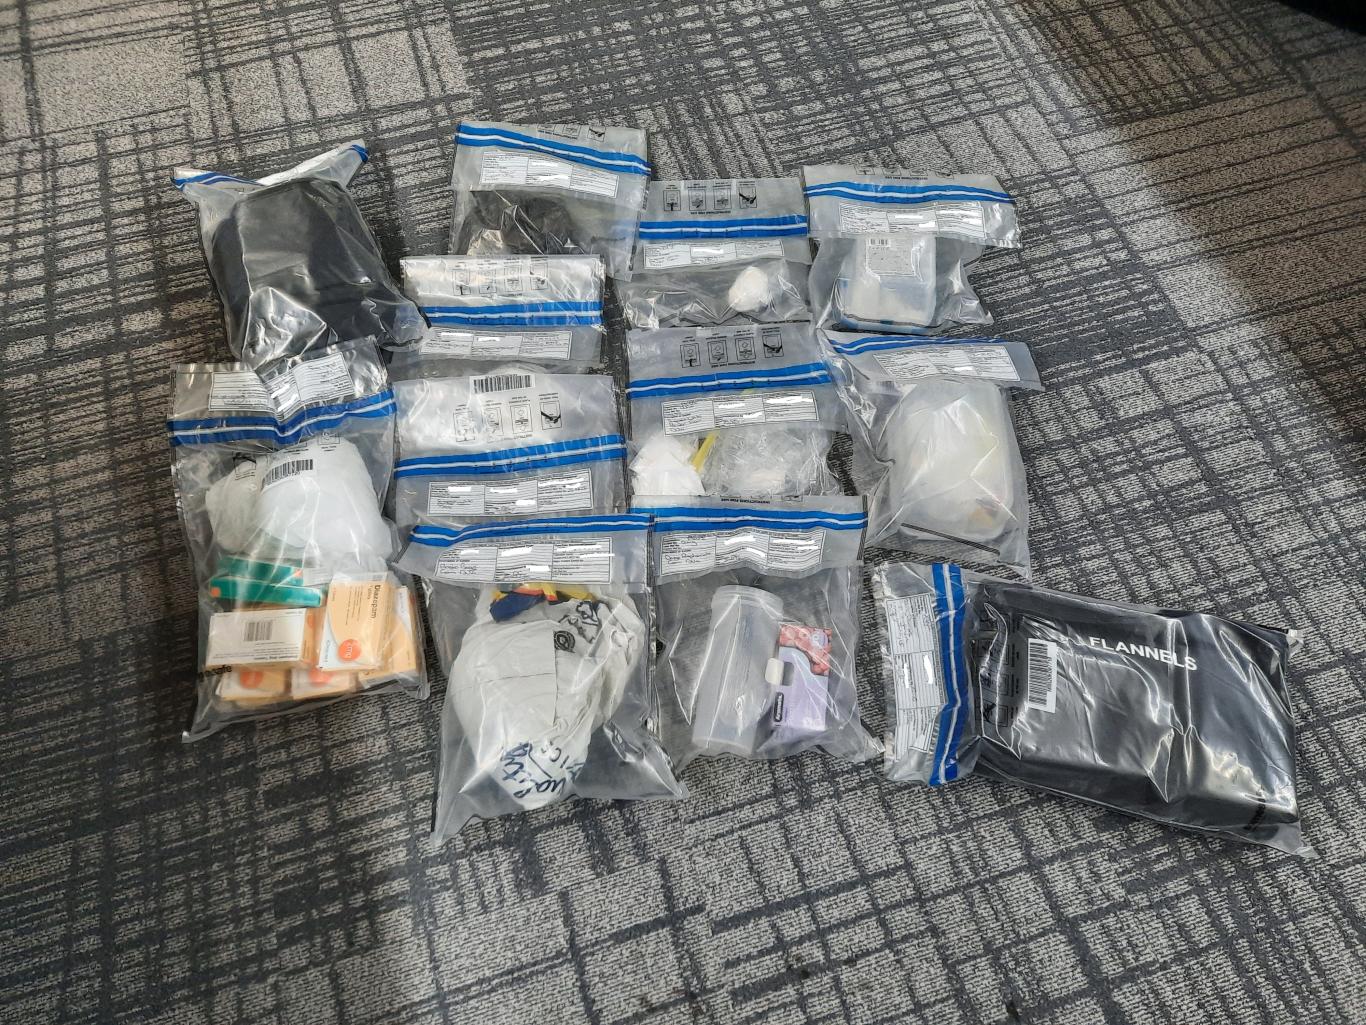 Police Arrest Man Linked to the Ulster Volunteer Force (UVF) Found in Possession of £100,000 Worth of Class A Drugs, East Belfast, Northern Ireland, United Kingdom - 27 March 2023